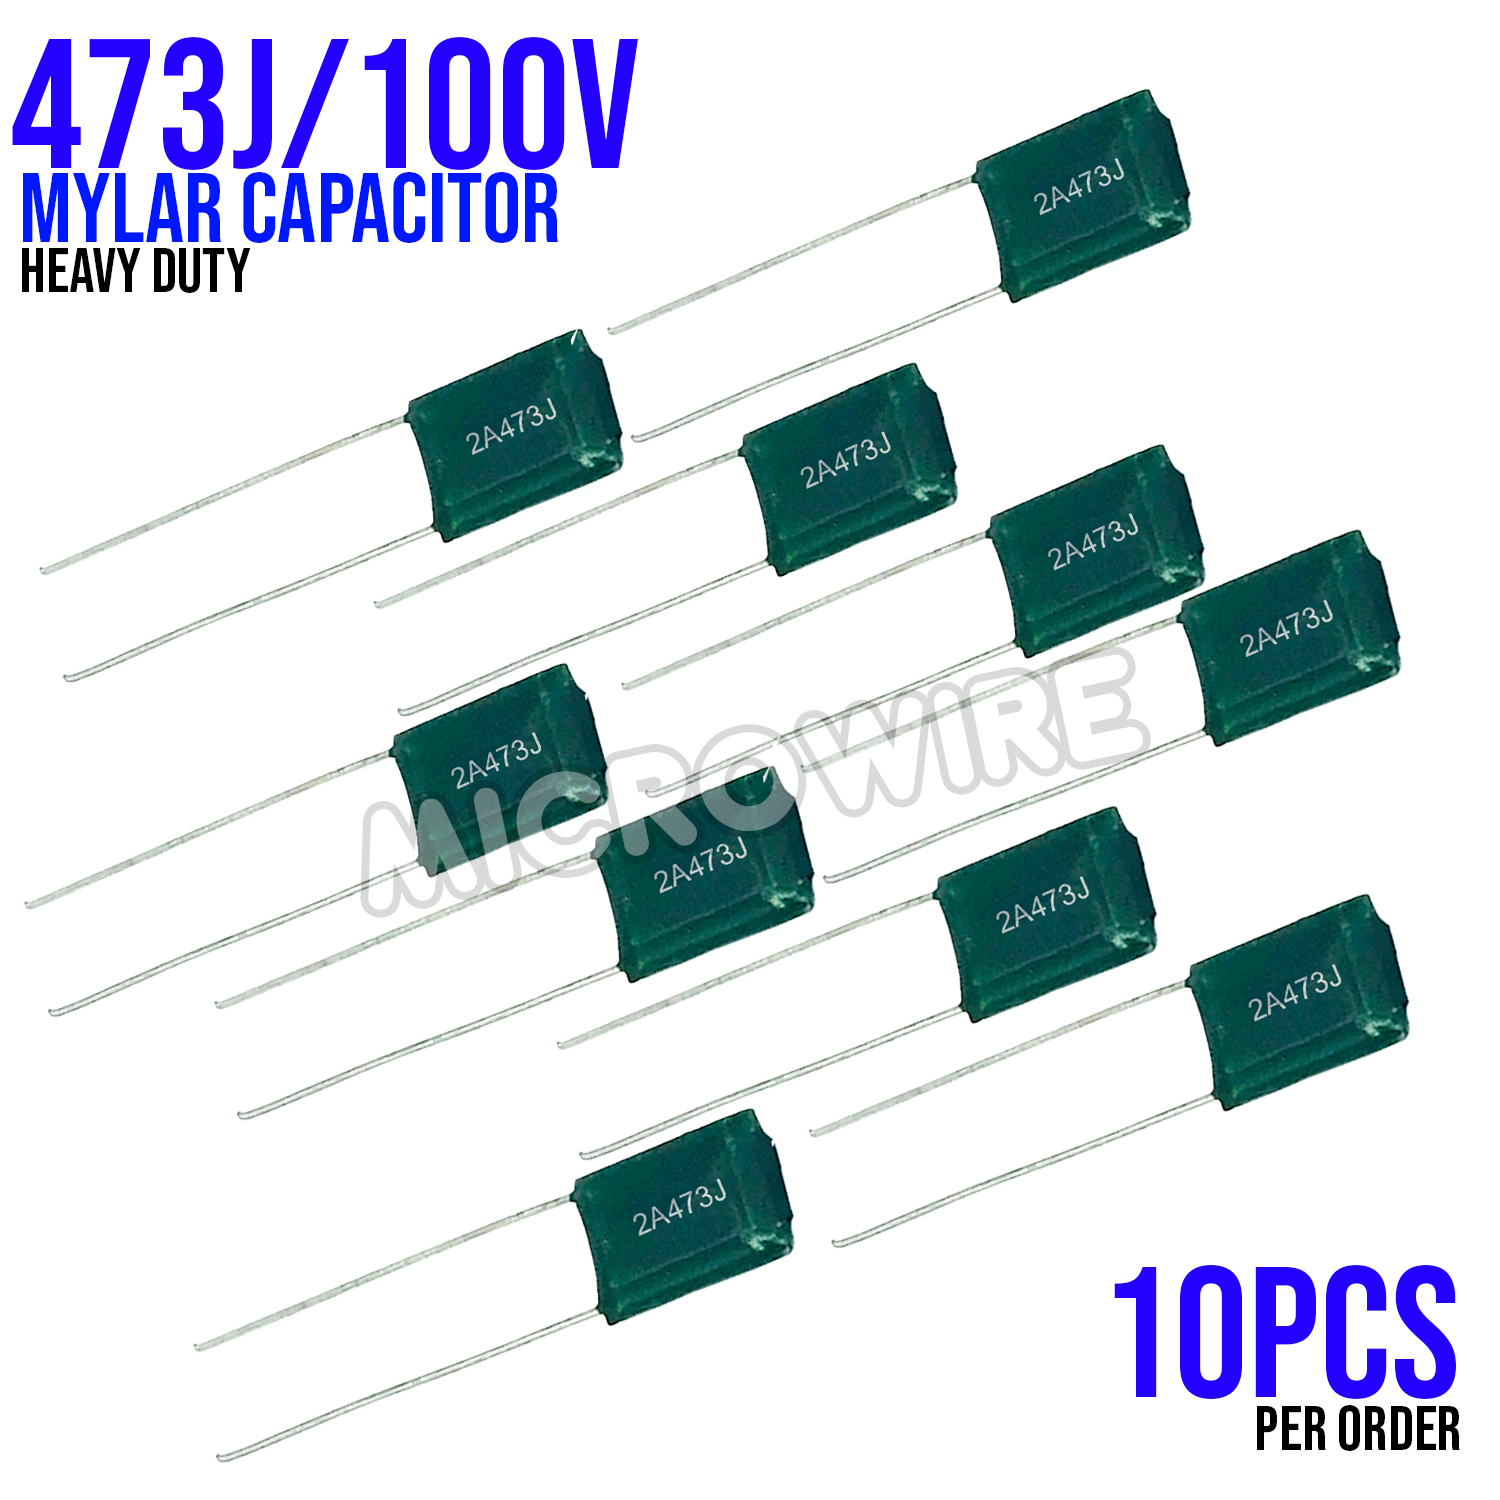 E-outstanding Polyester Film Capacitor 150PCS 0.33nf-470nf 15 Values Polyester Film Capacitors Assorted Kit Electronic Component DIY Assortment 